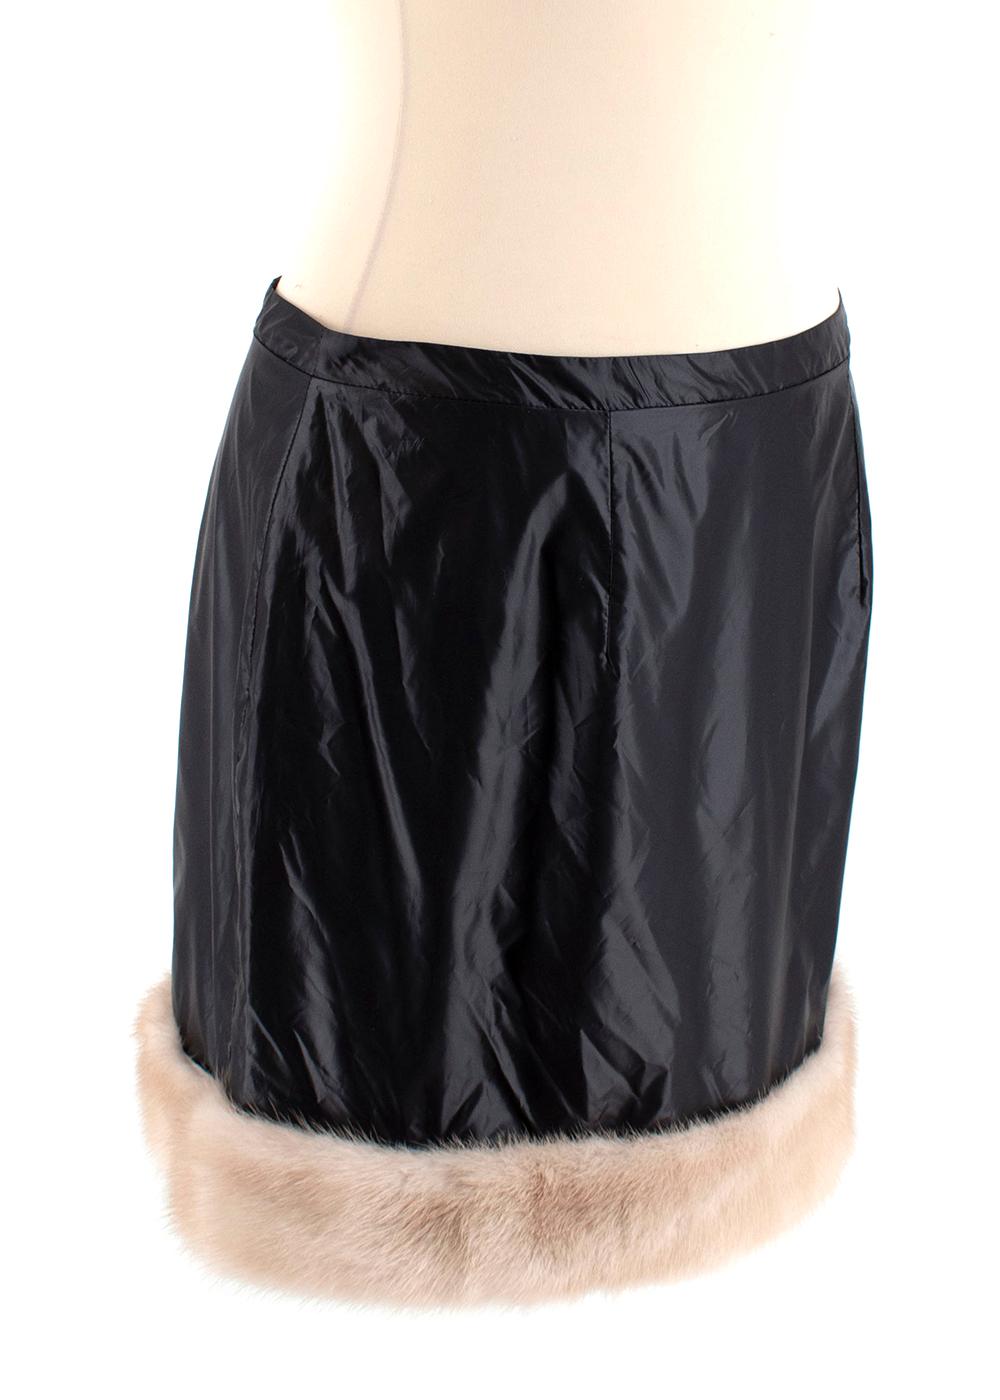 Christopher Kane Black & Beige Fur-trim Mini Skirt

Christopher Kane mixes natural and technical fabrics to directional effect in this black wet-look, fur-trimmed mini skirt. 

- Black, wet-look lightweight fabric
- Contrasting beige Mink